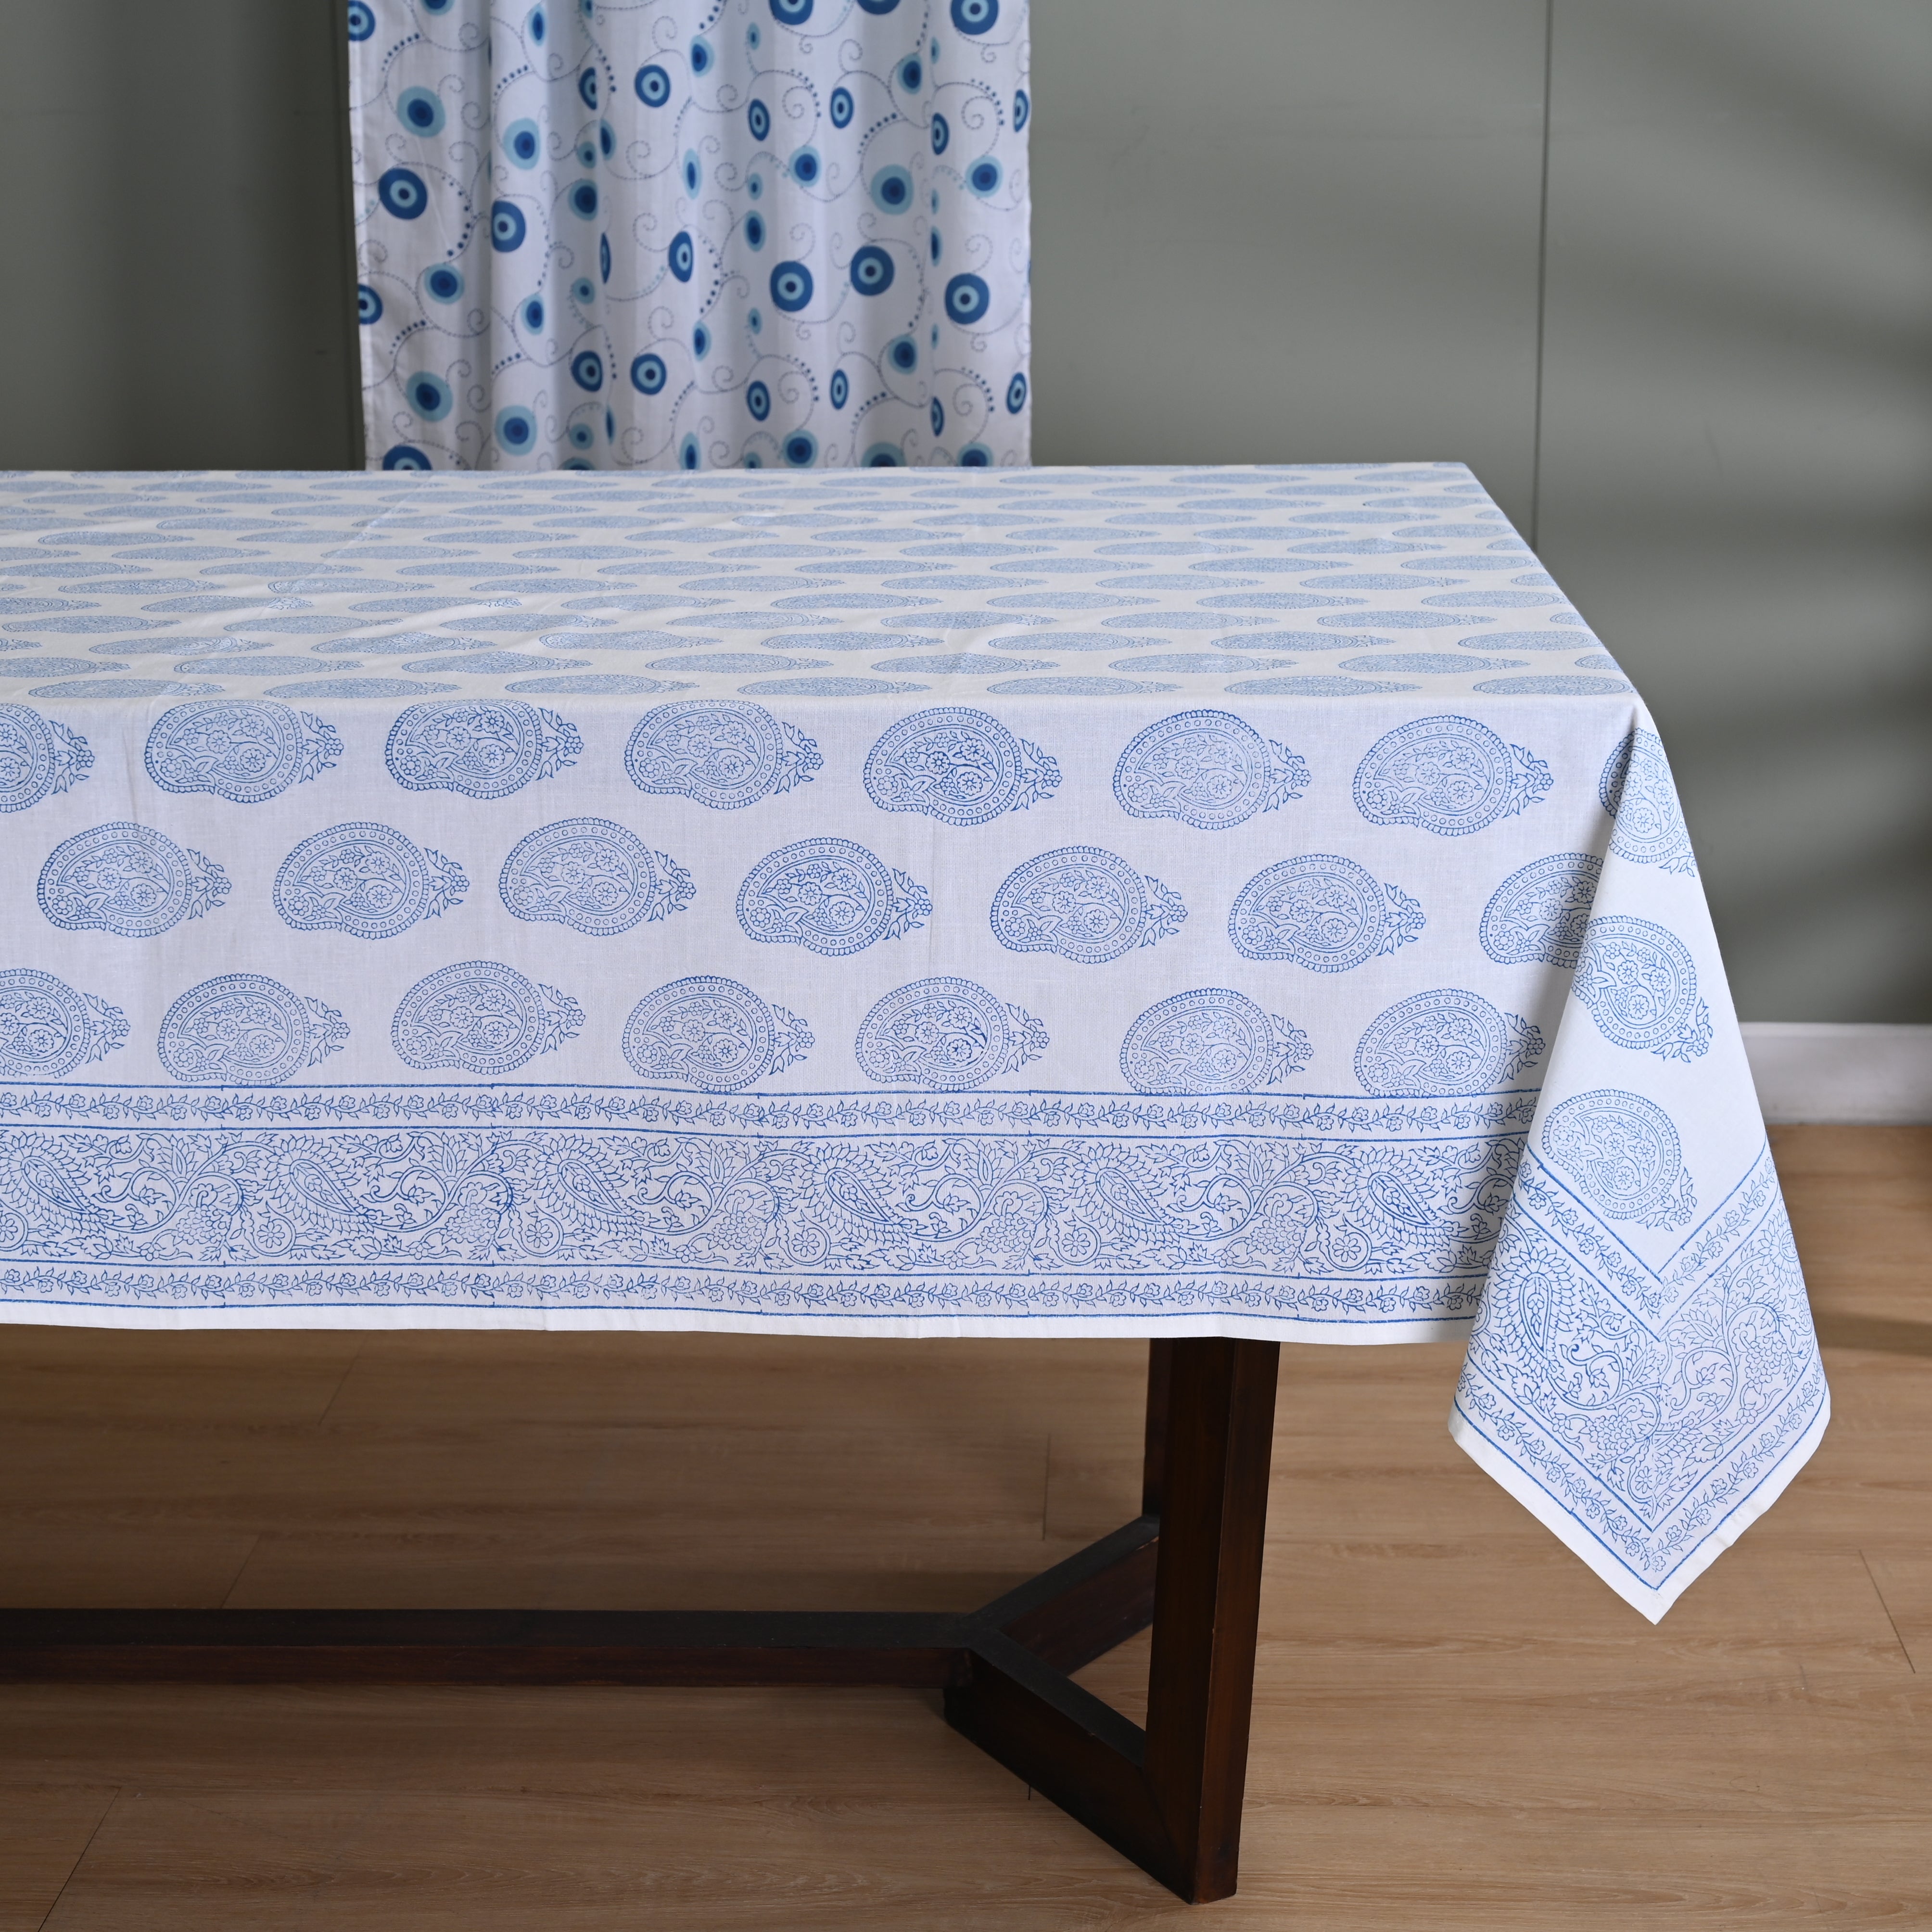 Stately Paisely 6 Seate Table Cover